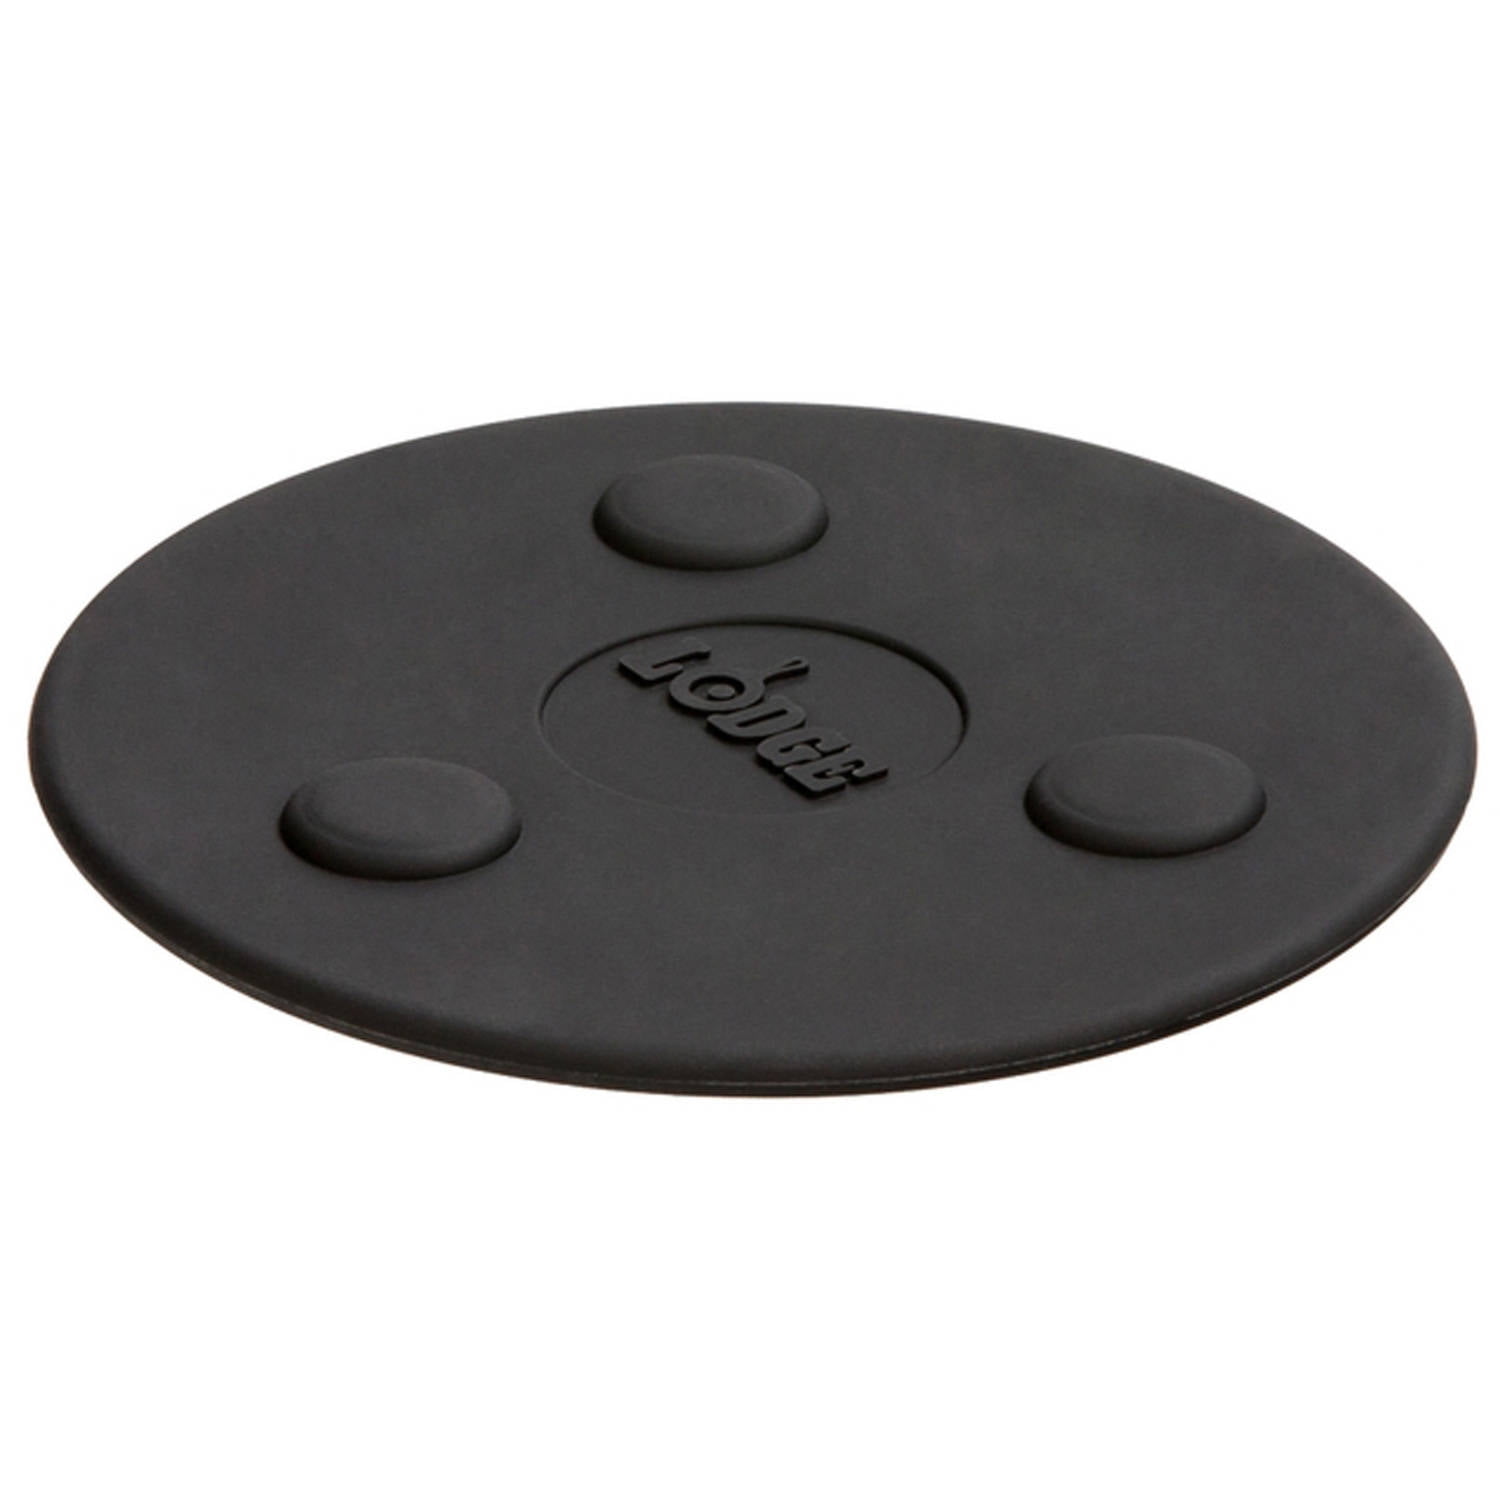 lodge mfg. 8 round magnetic silicone trivet